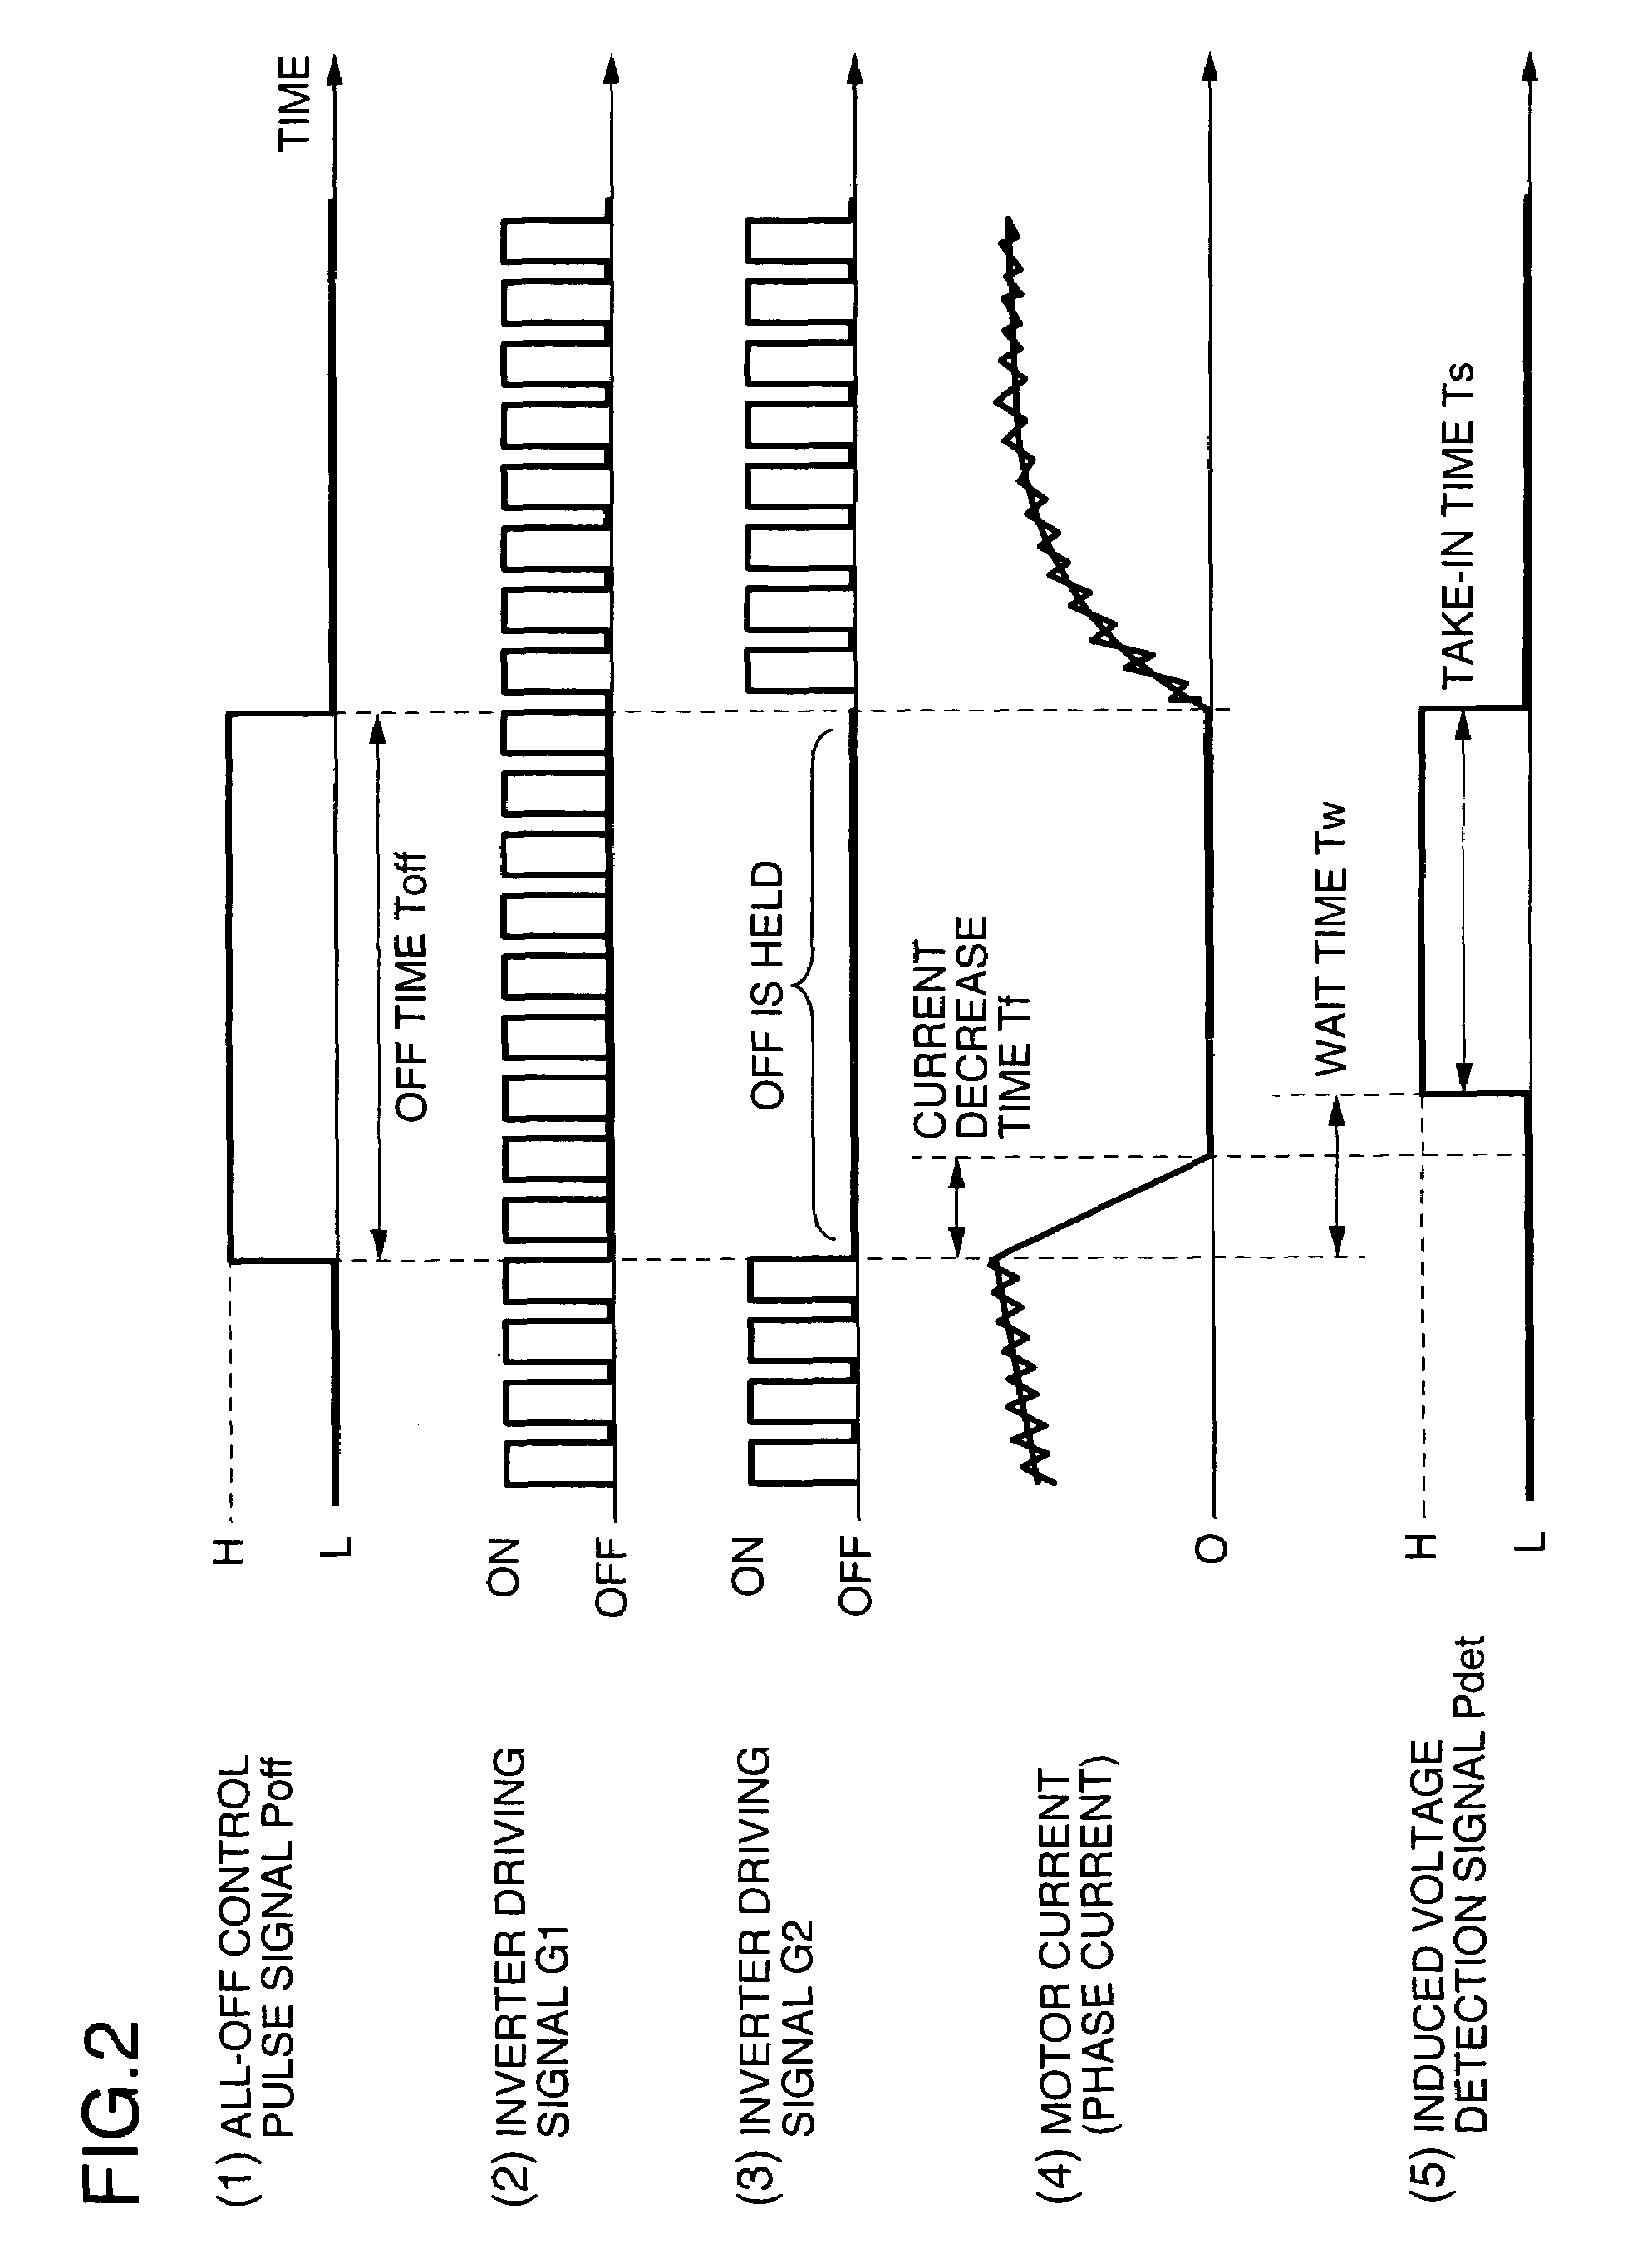 System and method for driving synchronous motor